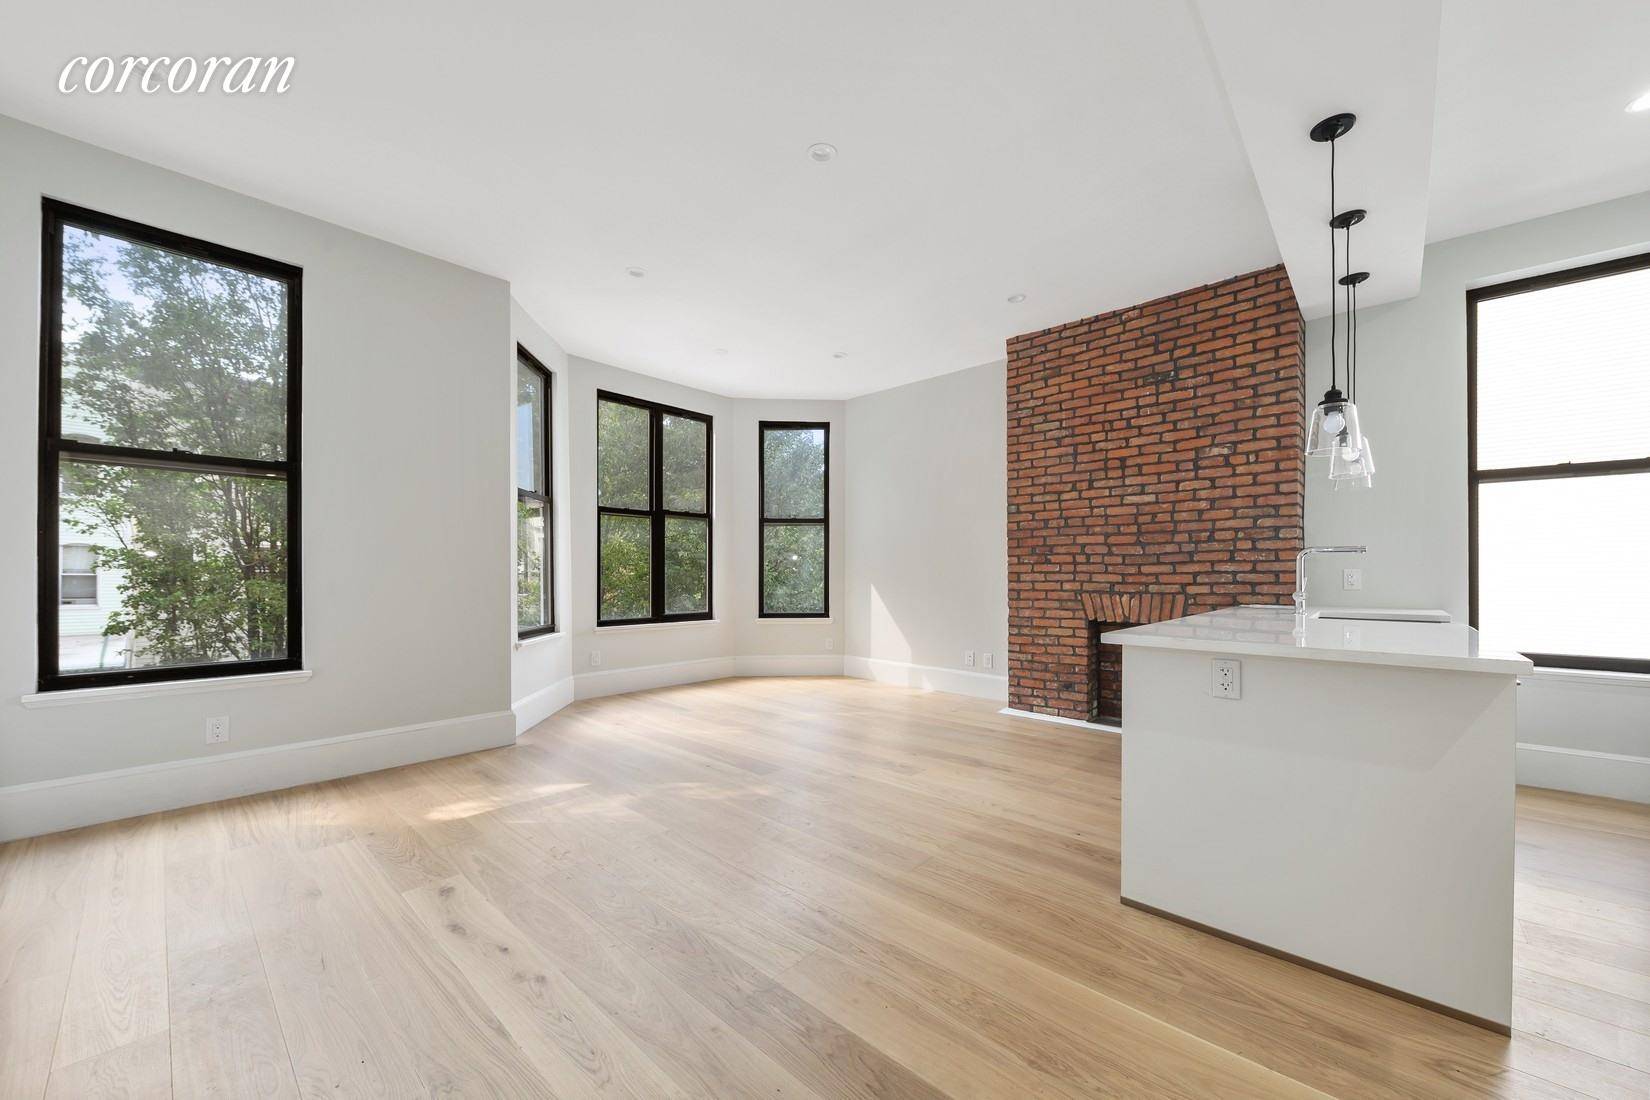 68 Grove is the rare condominium conversion building truly worthy of its Mansion neighbors on Bushwick Avenue.